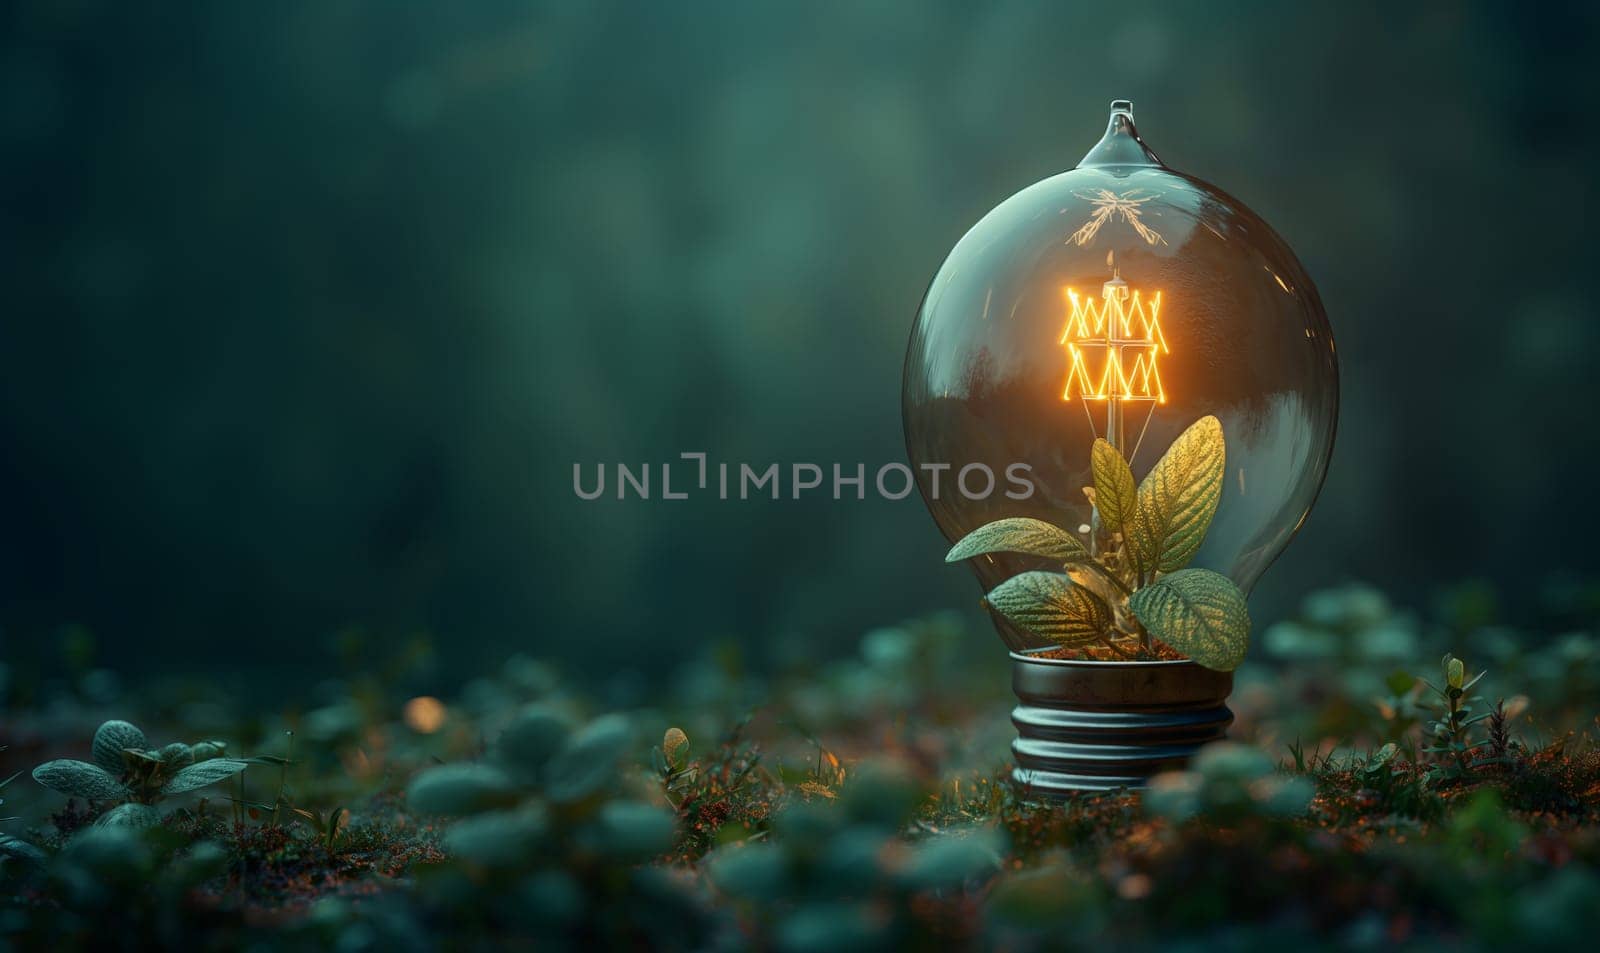 A light bulb containing a small green plant, creating a unique and eco-friendly decoration.